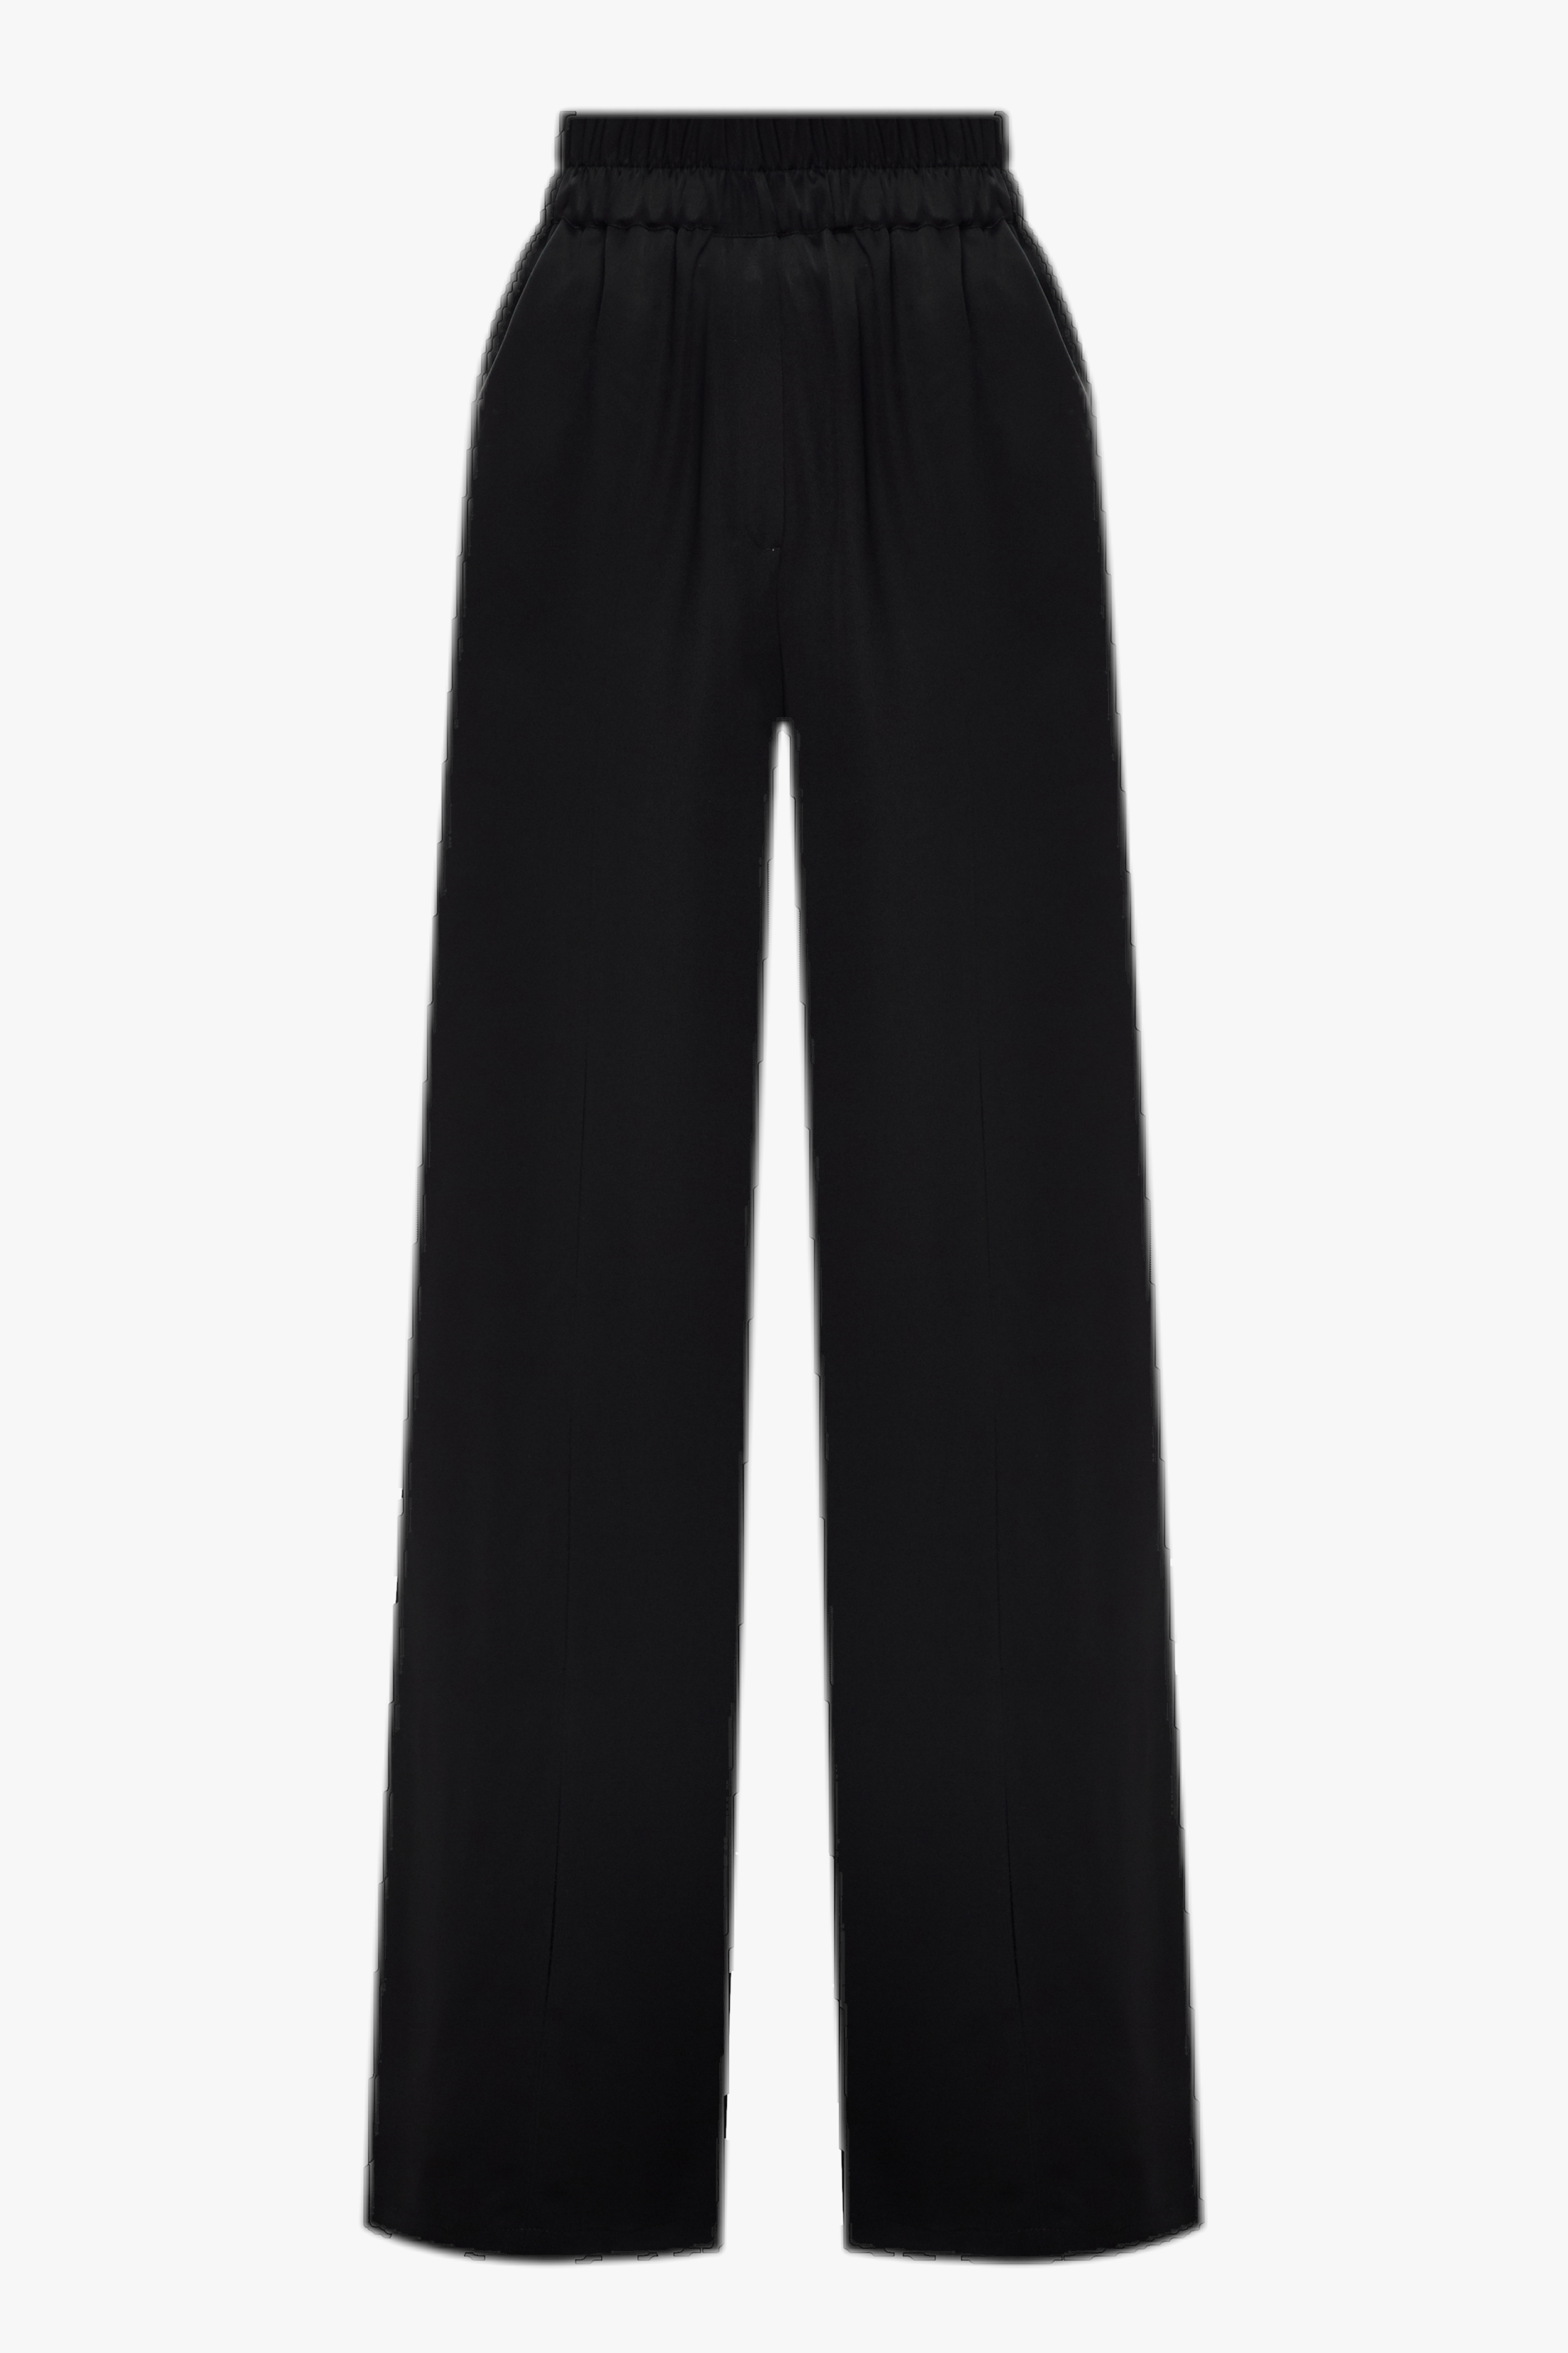 Shop Pants With An Elastic Band With Slits At The Seams In Black from Malva  Florea at Seezona